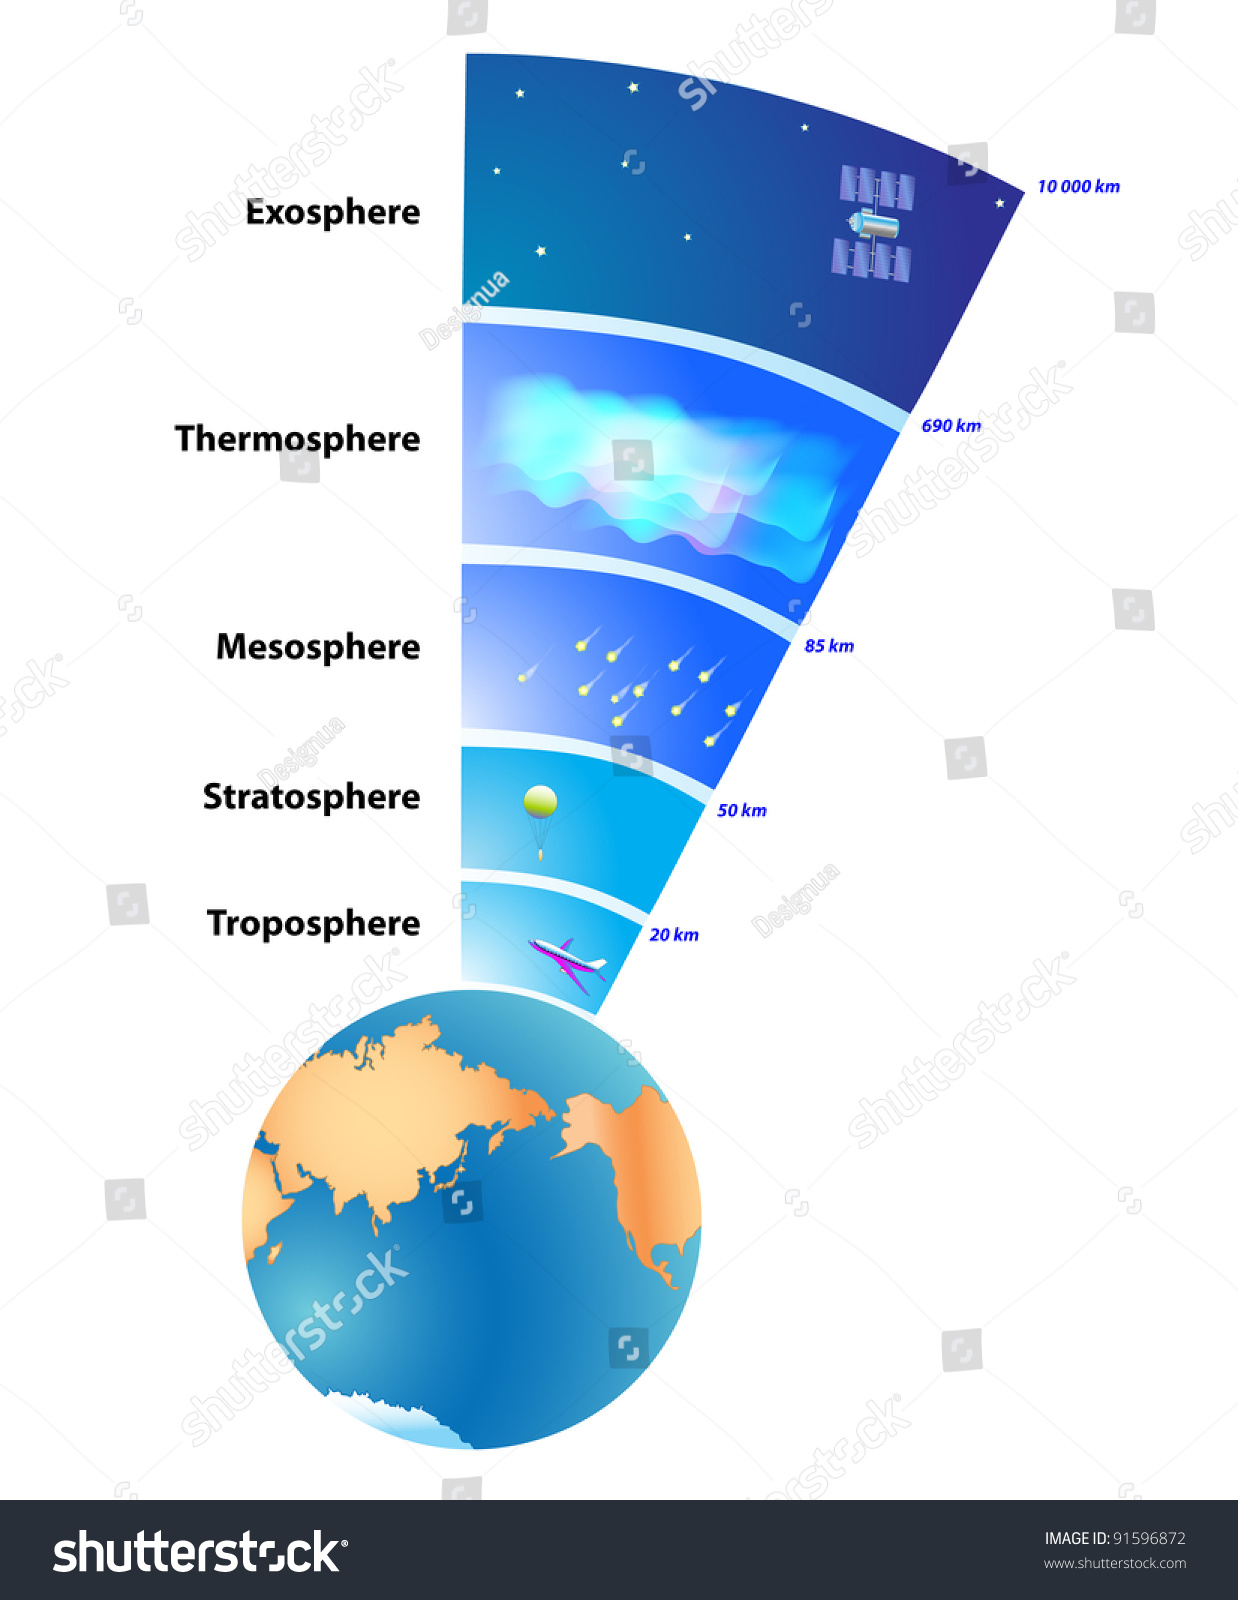 What are the gases of the thermosphere?